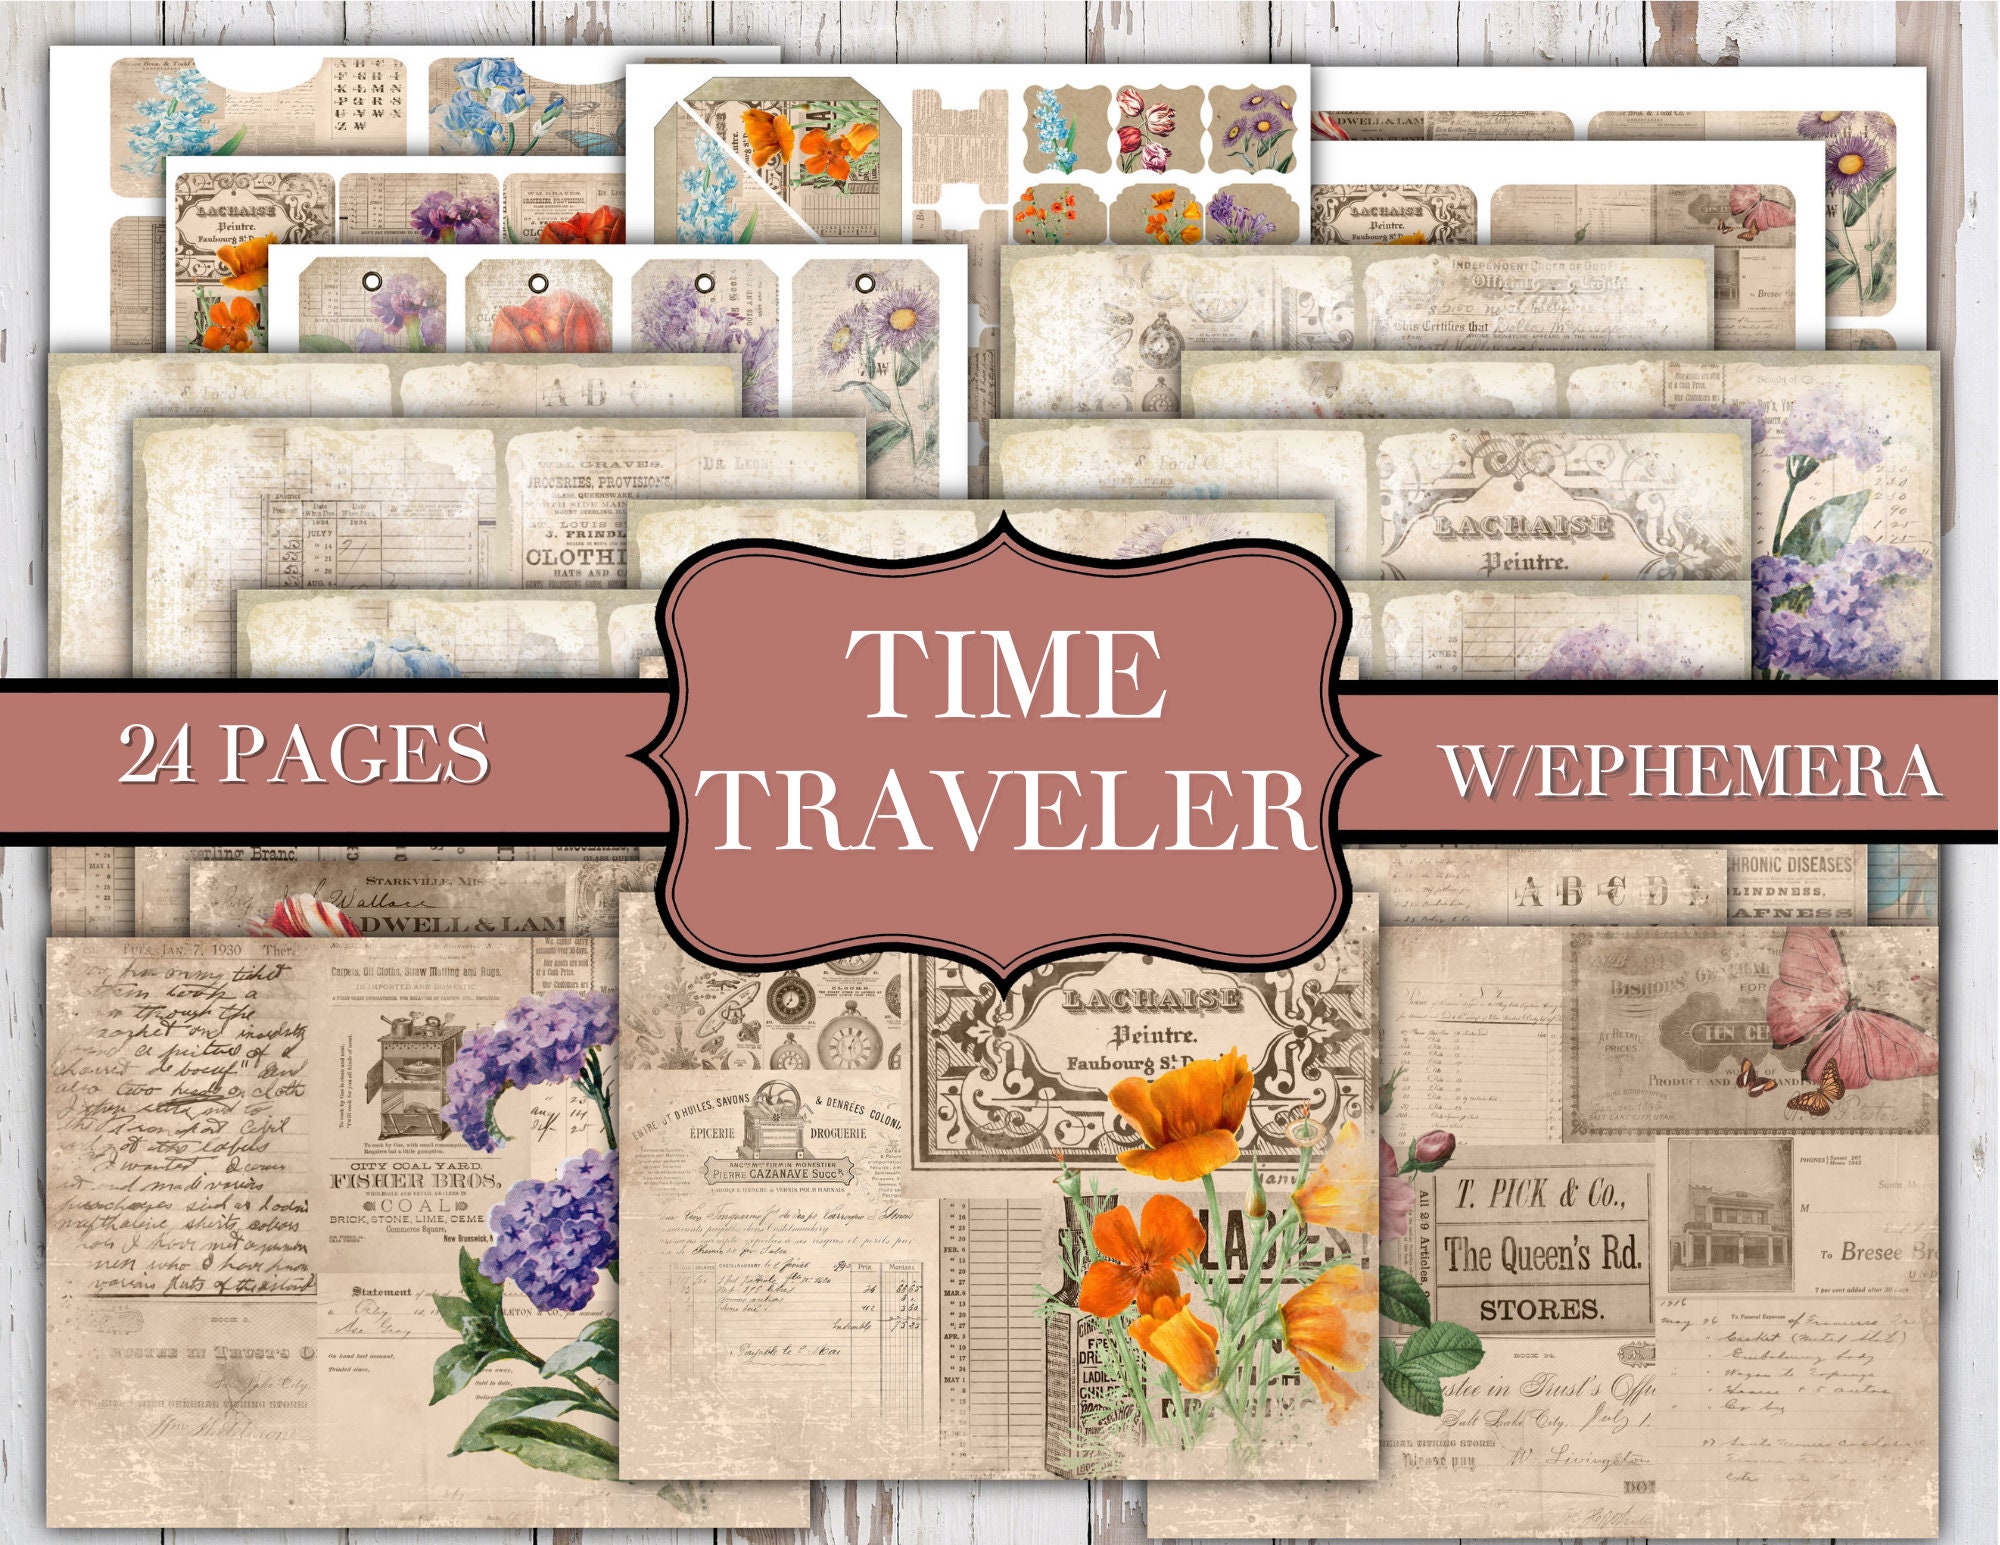 A ethereal background paper, scrapbooking, junk journal, various